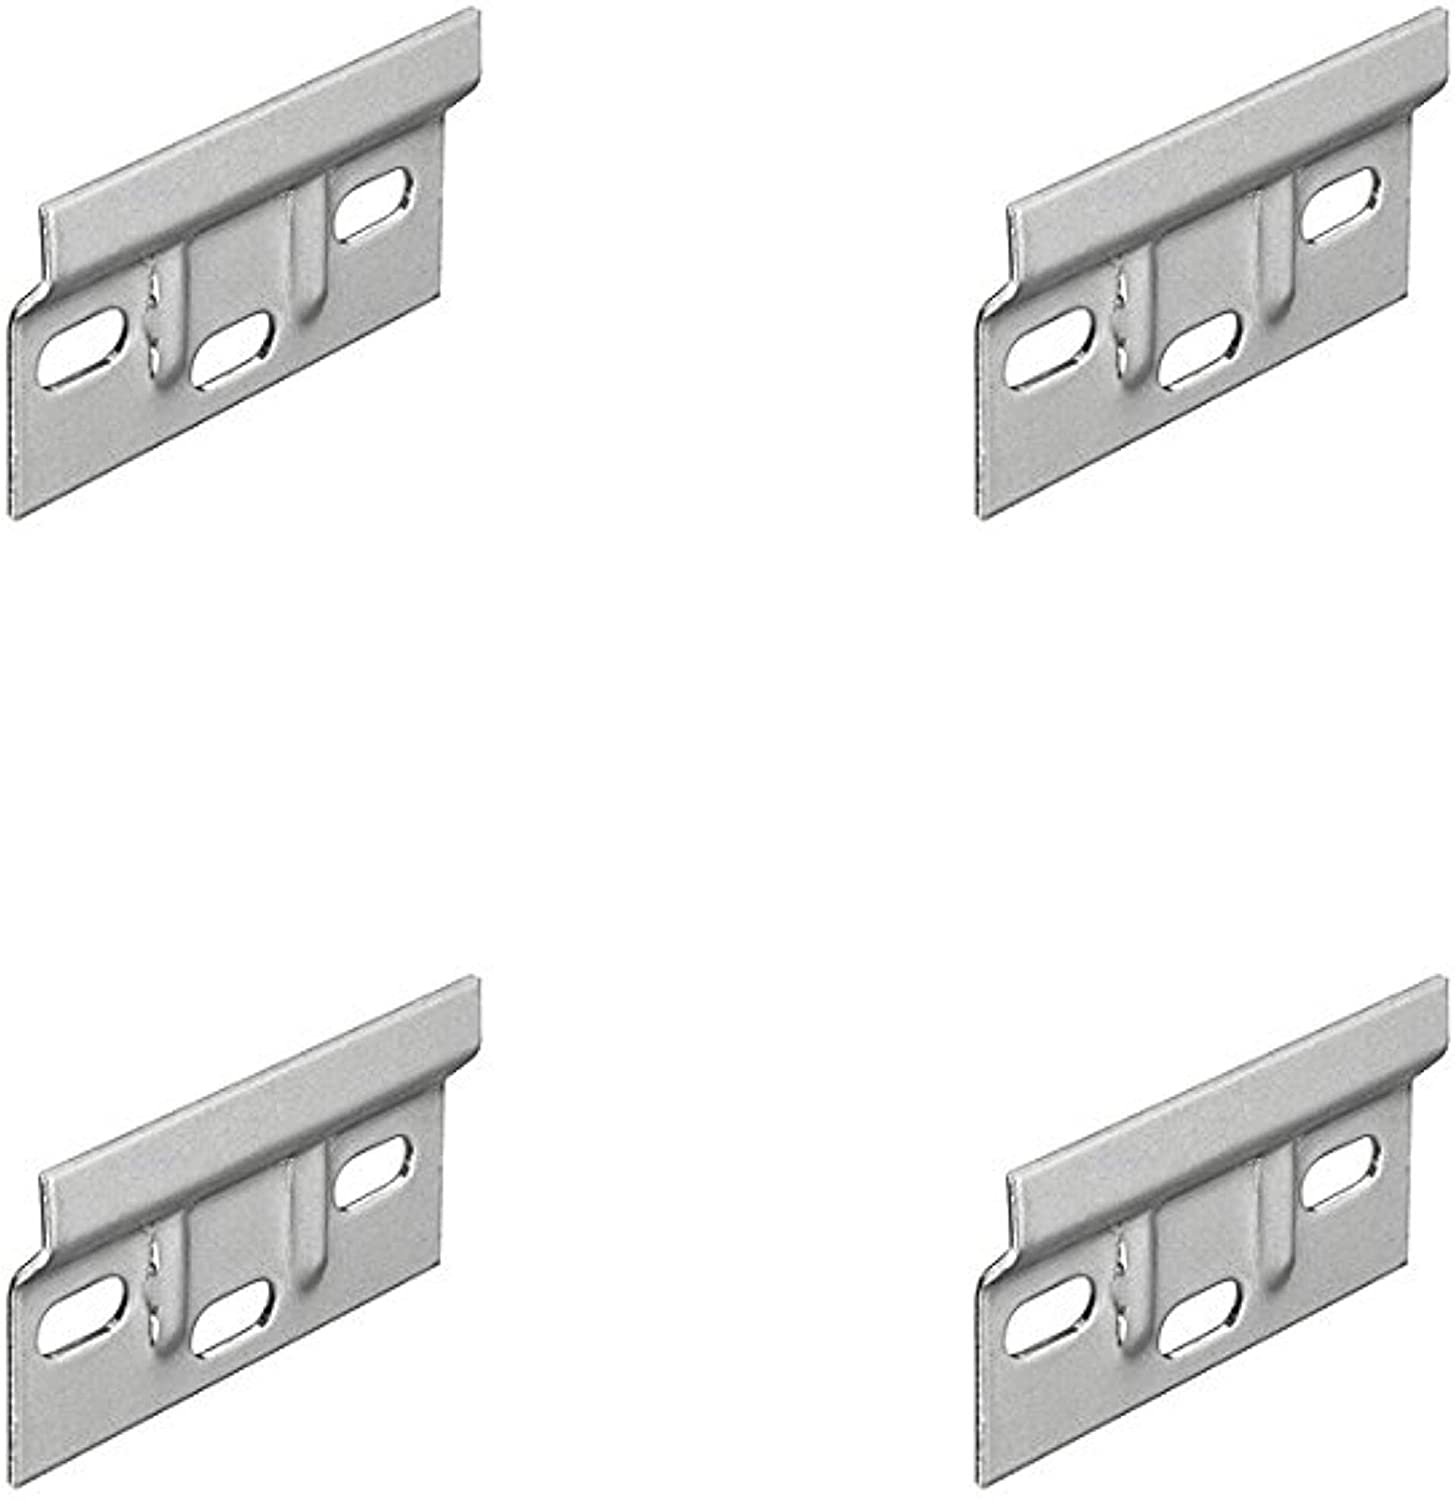 Hanger Plate 63mm Kitchen Cabinet Hanging Brackets for Wall Mounting Cupboards